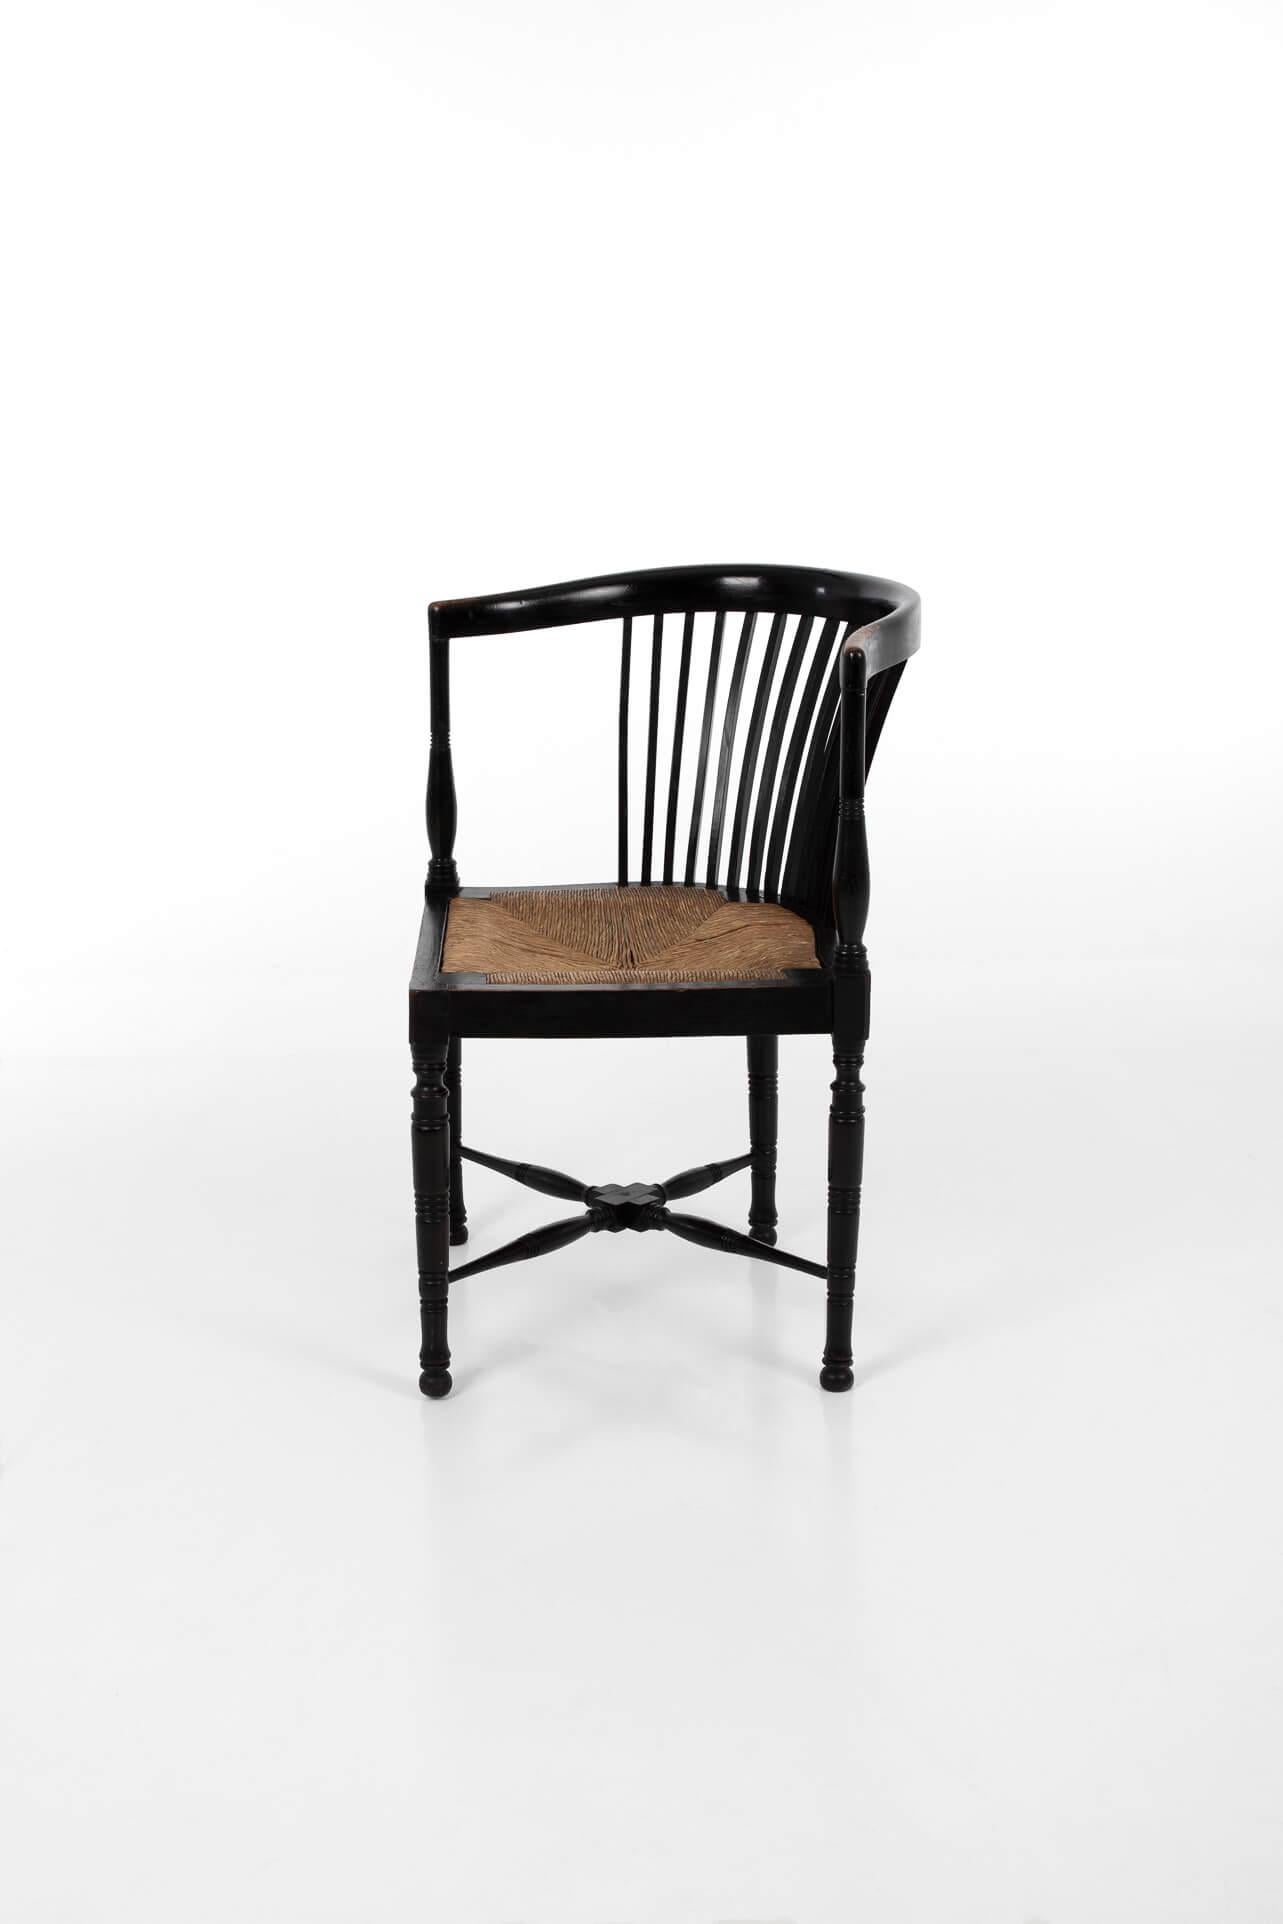 Fabulous ebonised Arts and Crafts corner chair. In original condition with lovely wear to both arms. Complete with the original drop-in woven rush seat. 
British, circa 1900.

Additional Information:
H 71 cm (H 27.9 inches)
W 55 cm (W 21.6